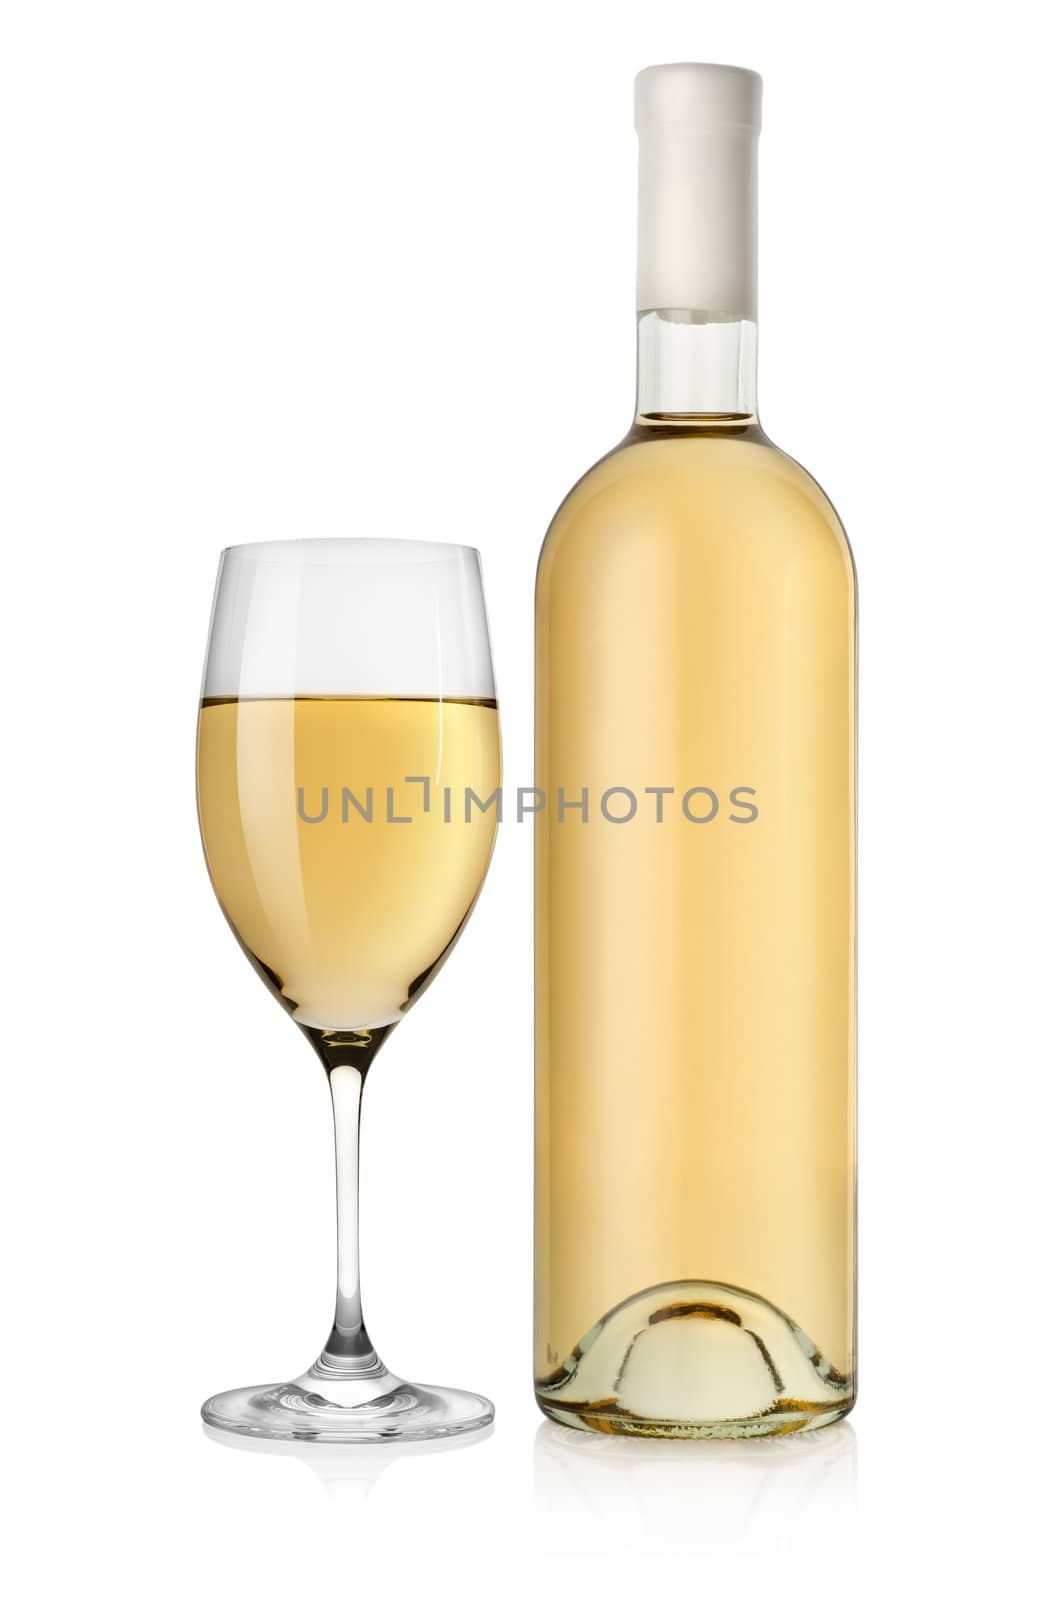 Bottle of white wine and wine glass by Givaga